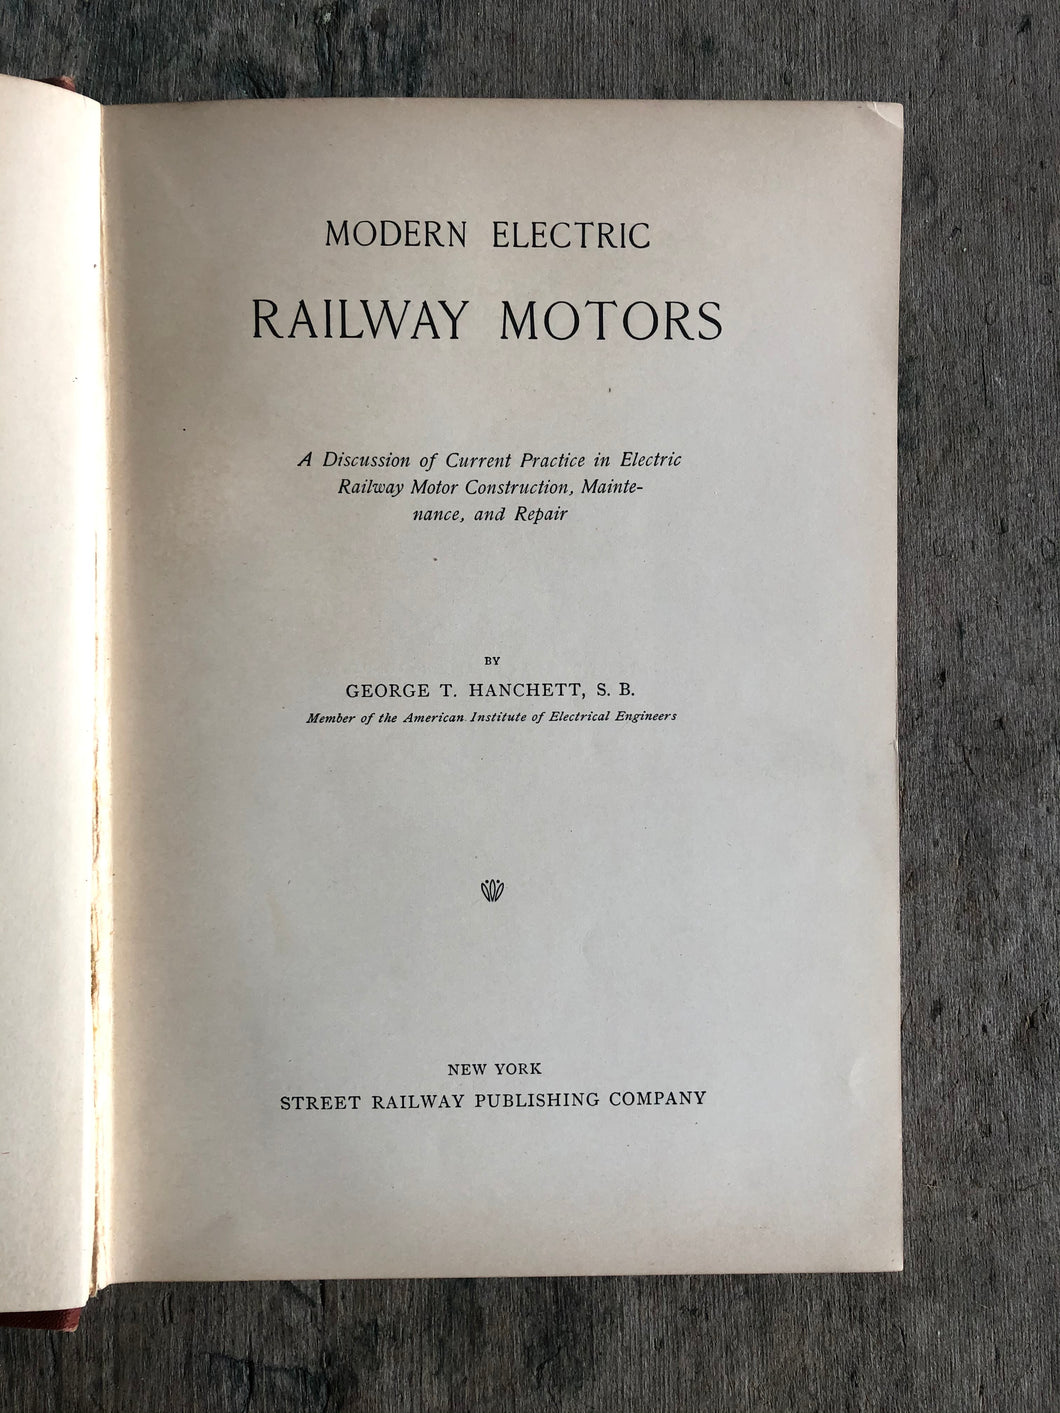 “Modern Electric Railway Motors: A Discussion of Current Practice in Electric Railway Motor Construction, Maintenance, and Repair” by George T. Hanchett